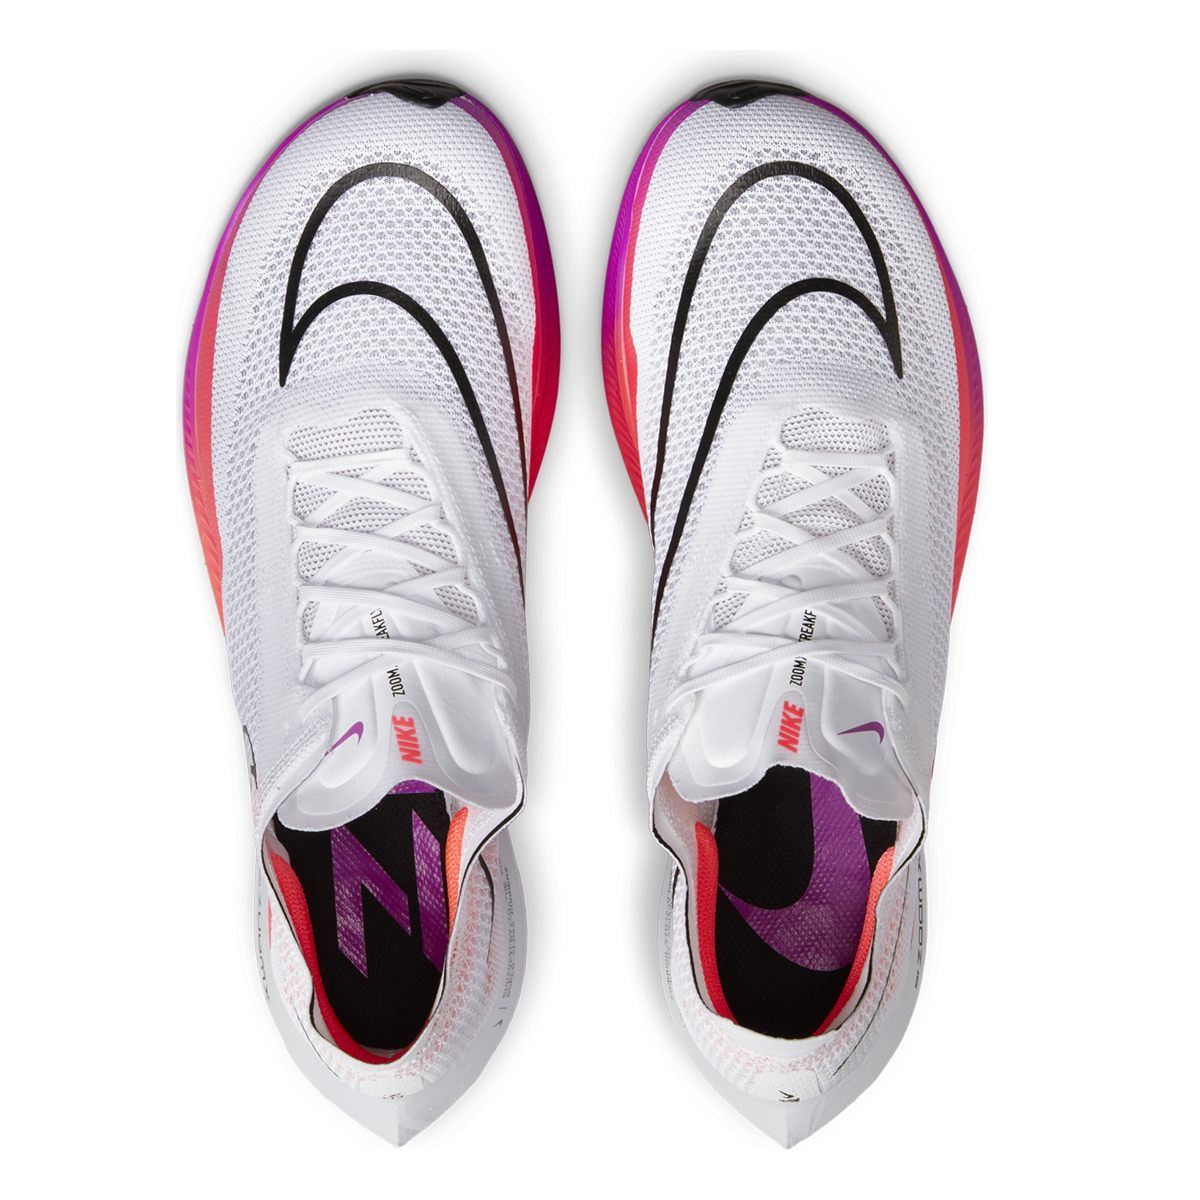 Nike ZoomX Streakfly, , large image number null